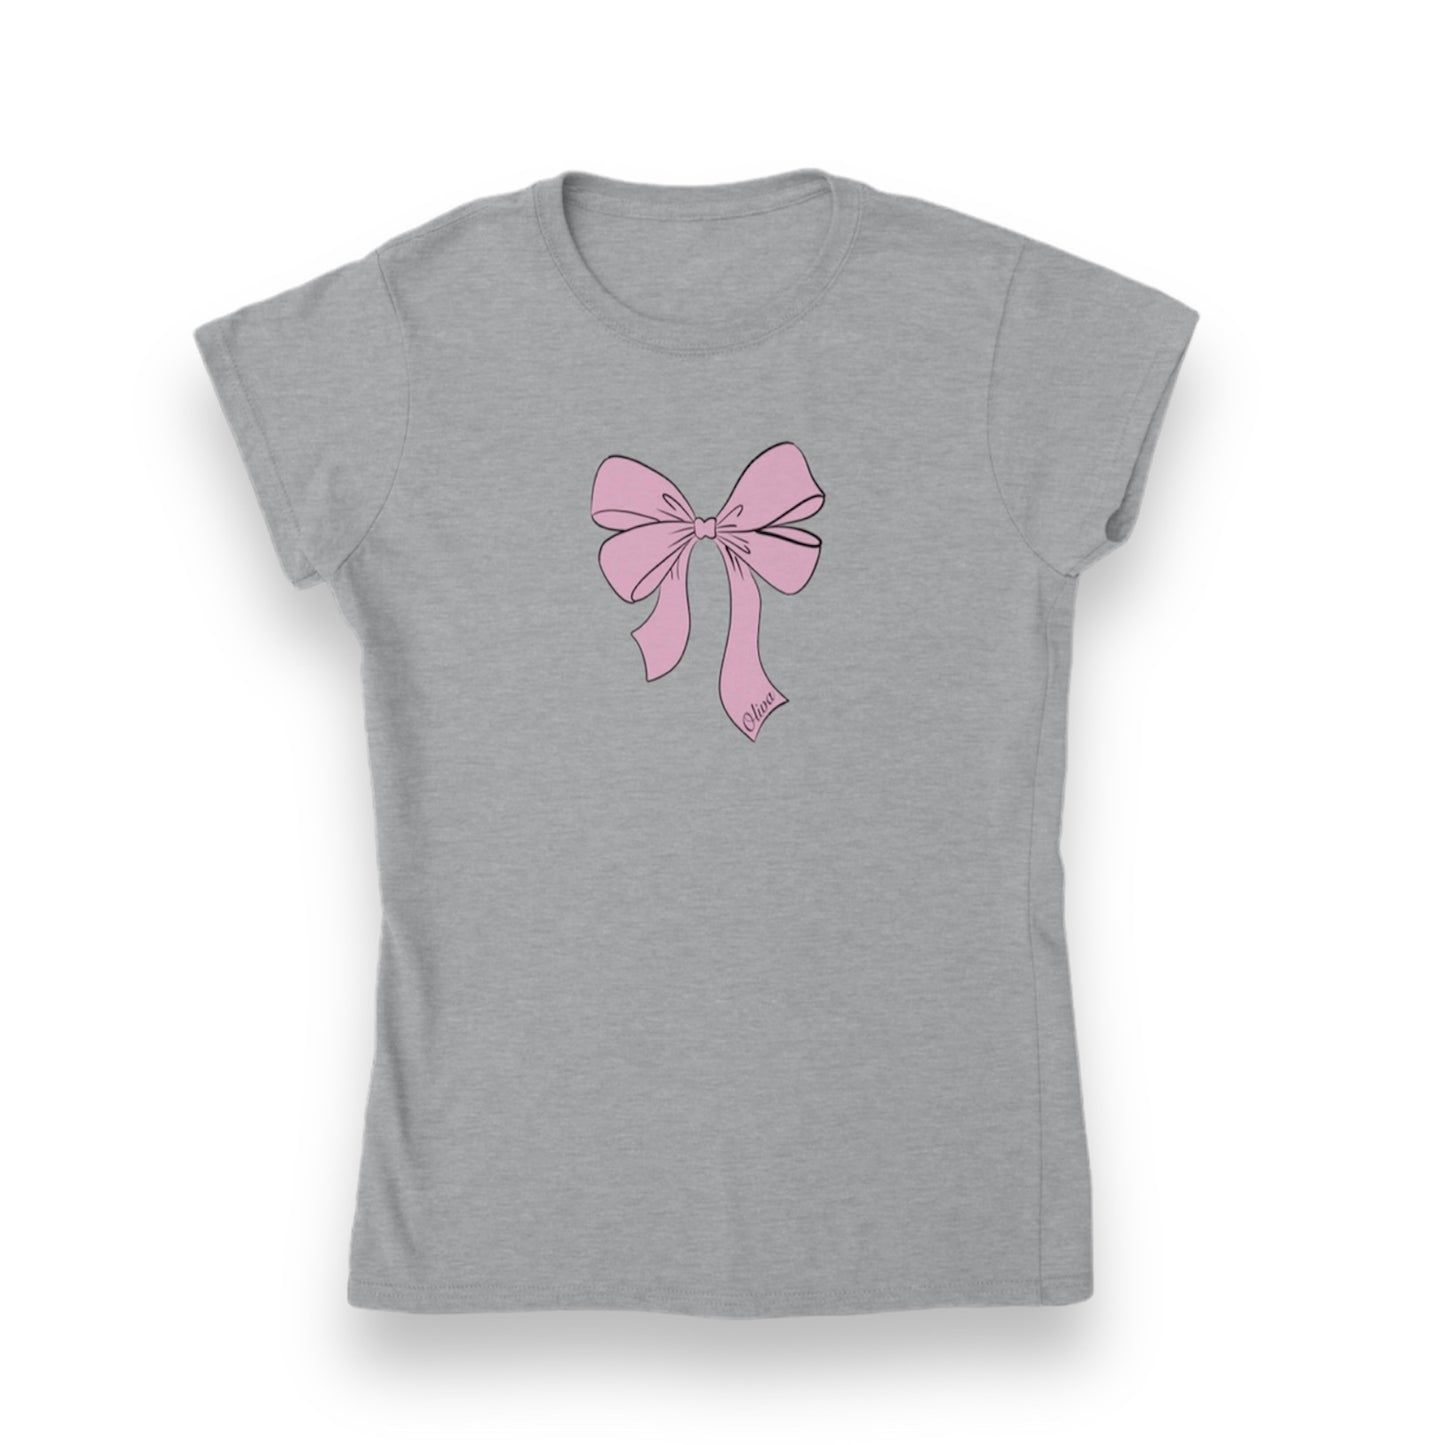 ‘Pretty n Pink’ Bow Baby Tee.